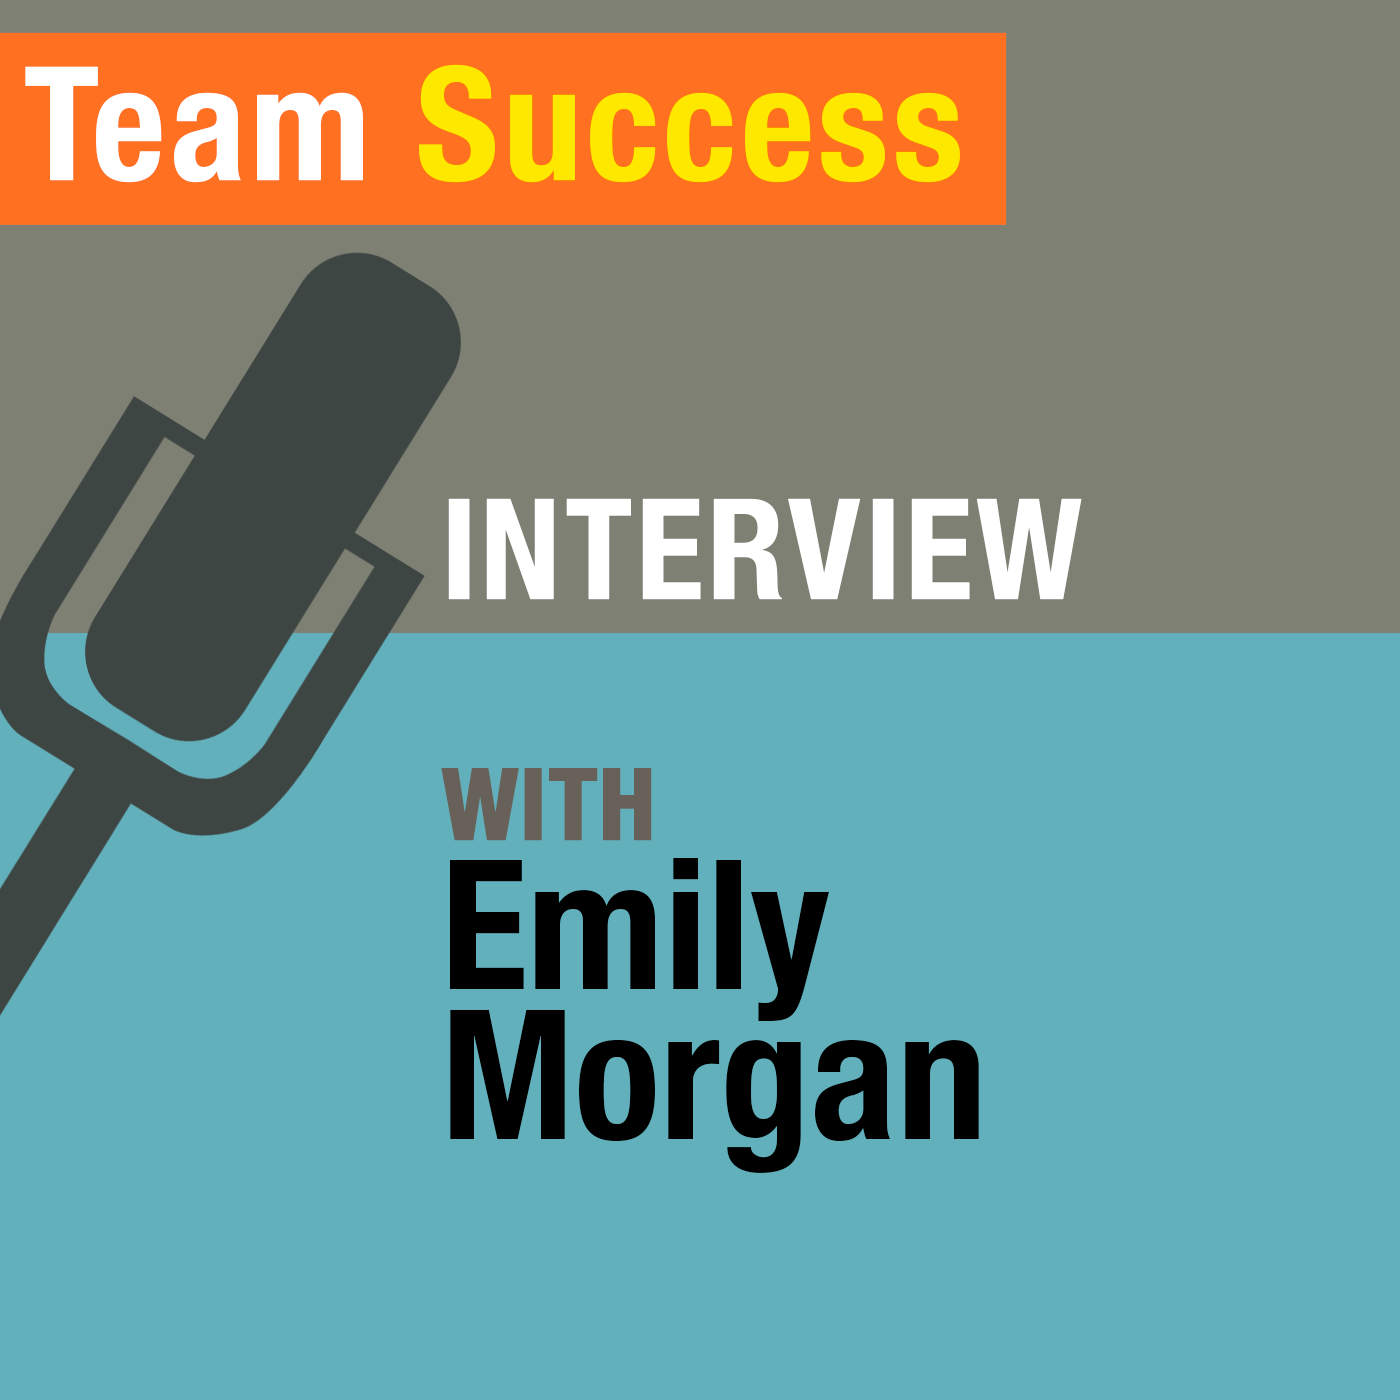 An Interview with Emily Morgan